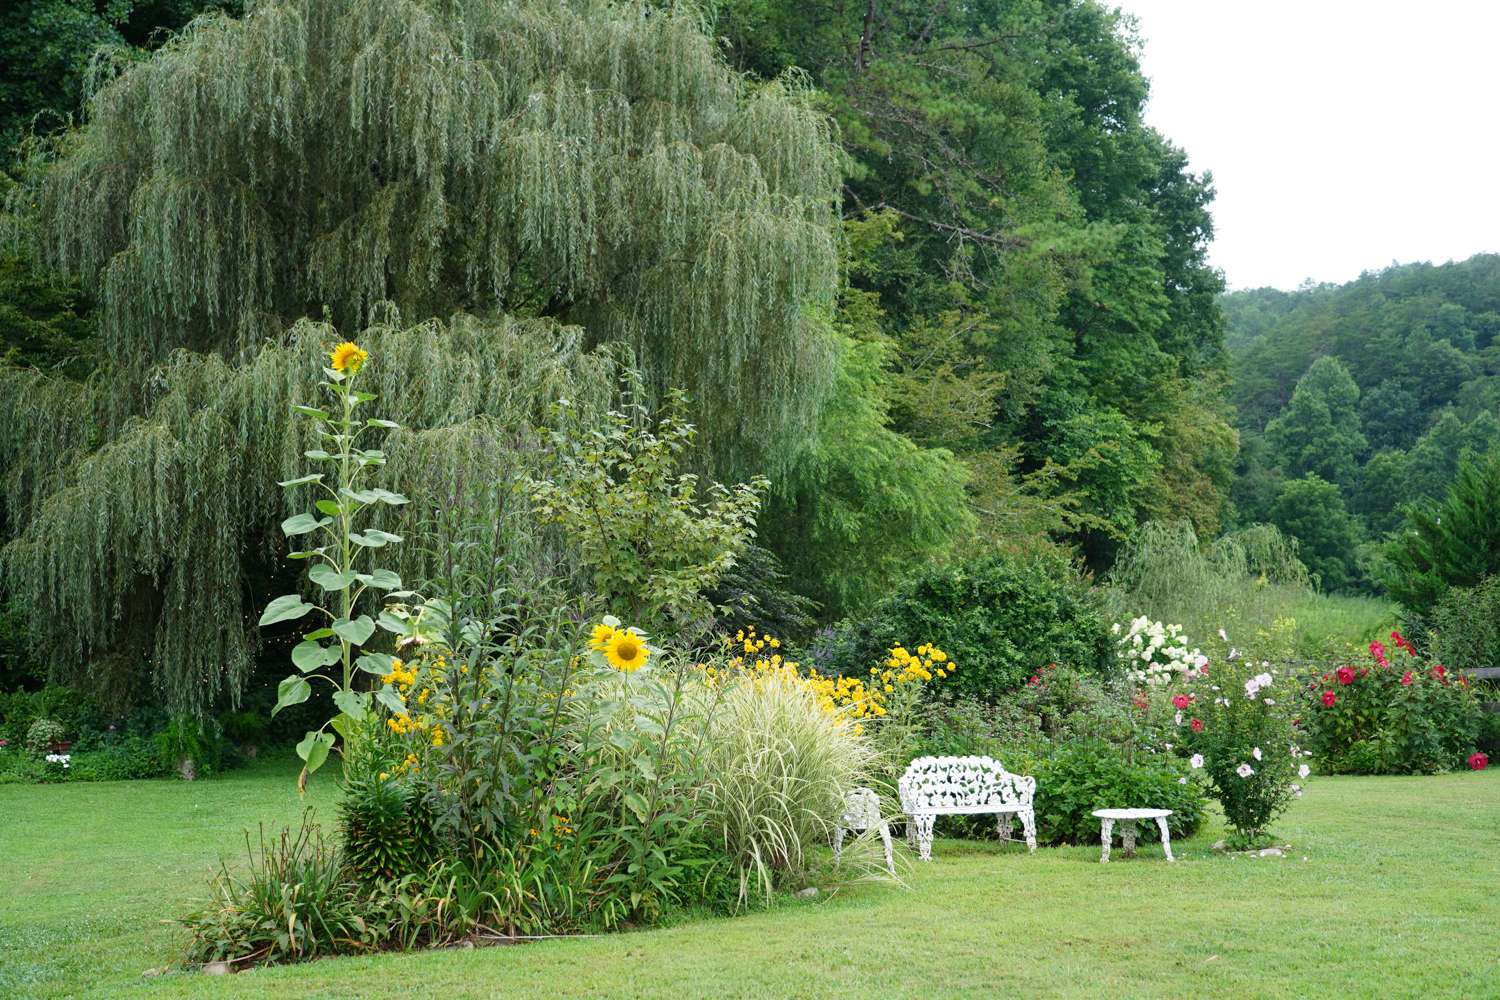 willow tree and garden with sunflowers by white garden furniture